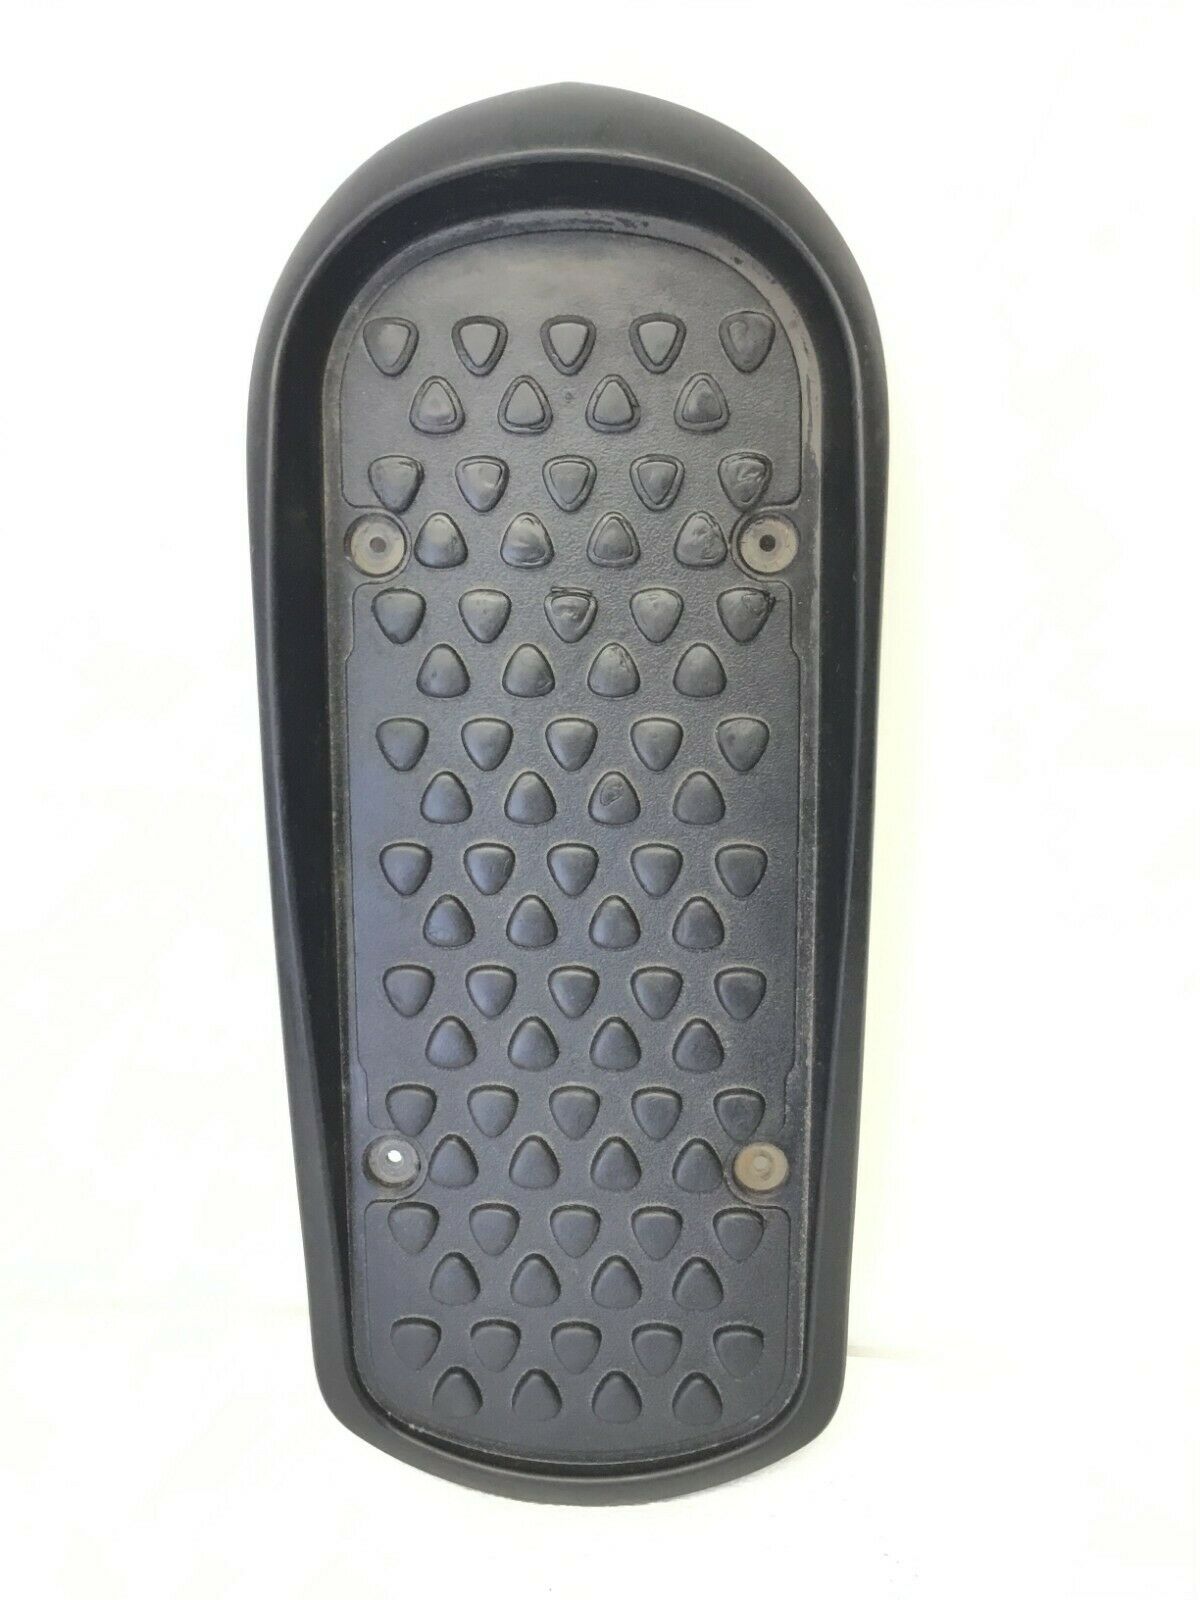 BH Fitness X8 2008 BL27 3588 Elliptical Foot Pedal Pad (Used)